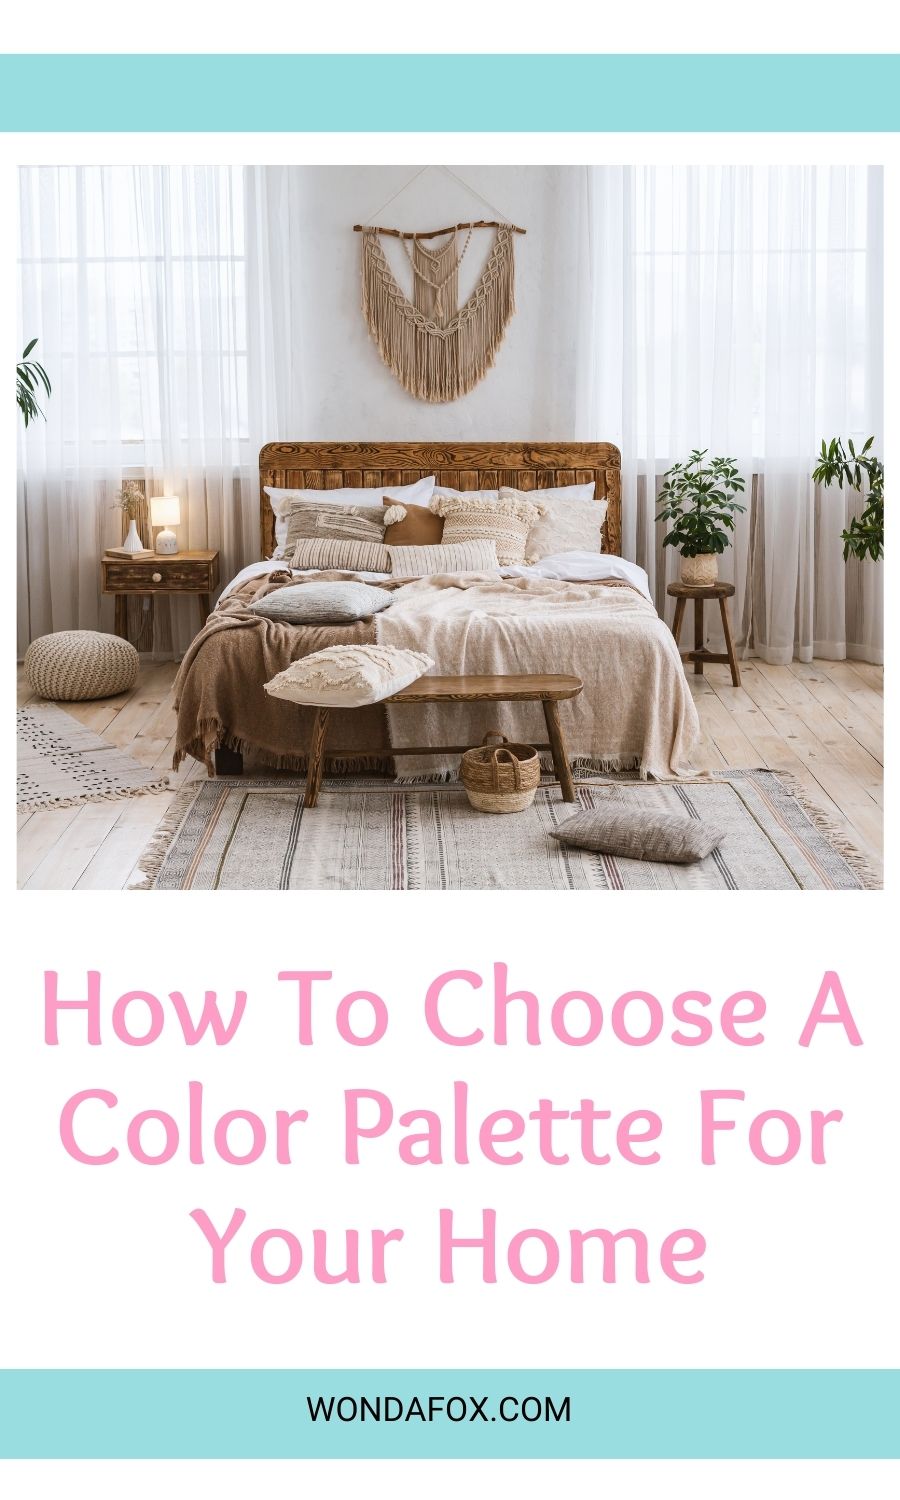 Consideration before choosing what paint colour palettes to pursue